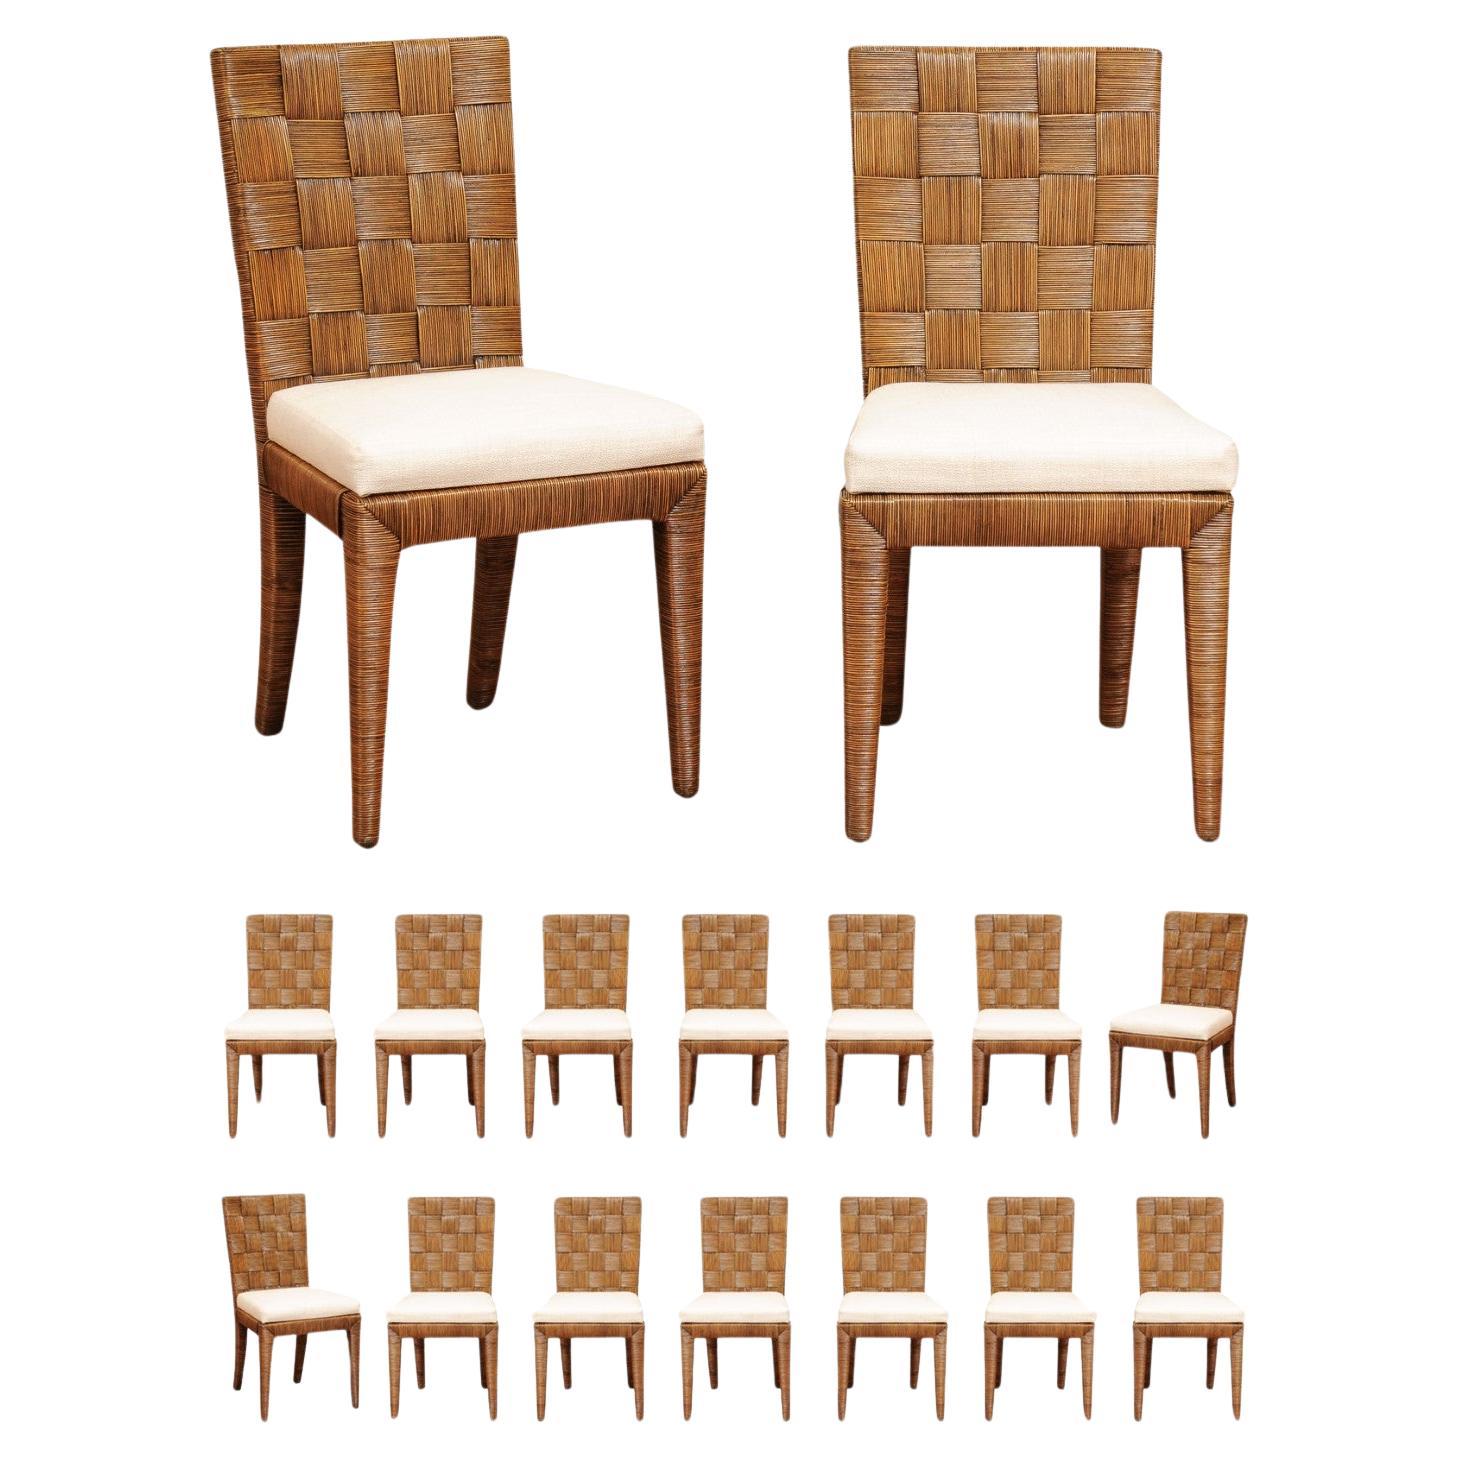 Incredible Set of 16 Vintage Tobacco Cane Chairs by John Hutton for Donghia For Sale